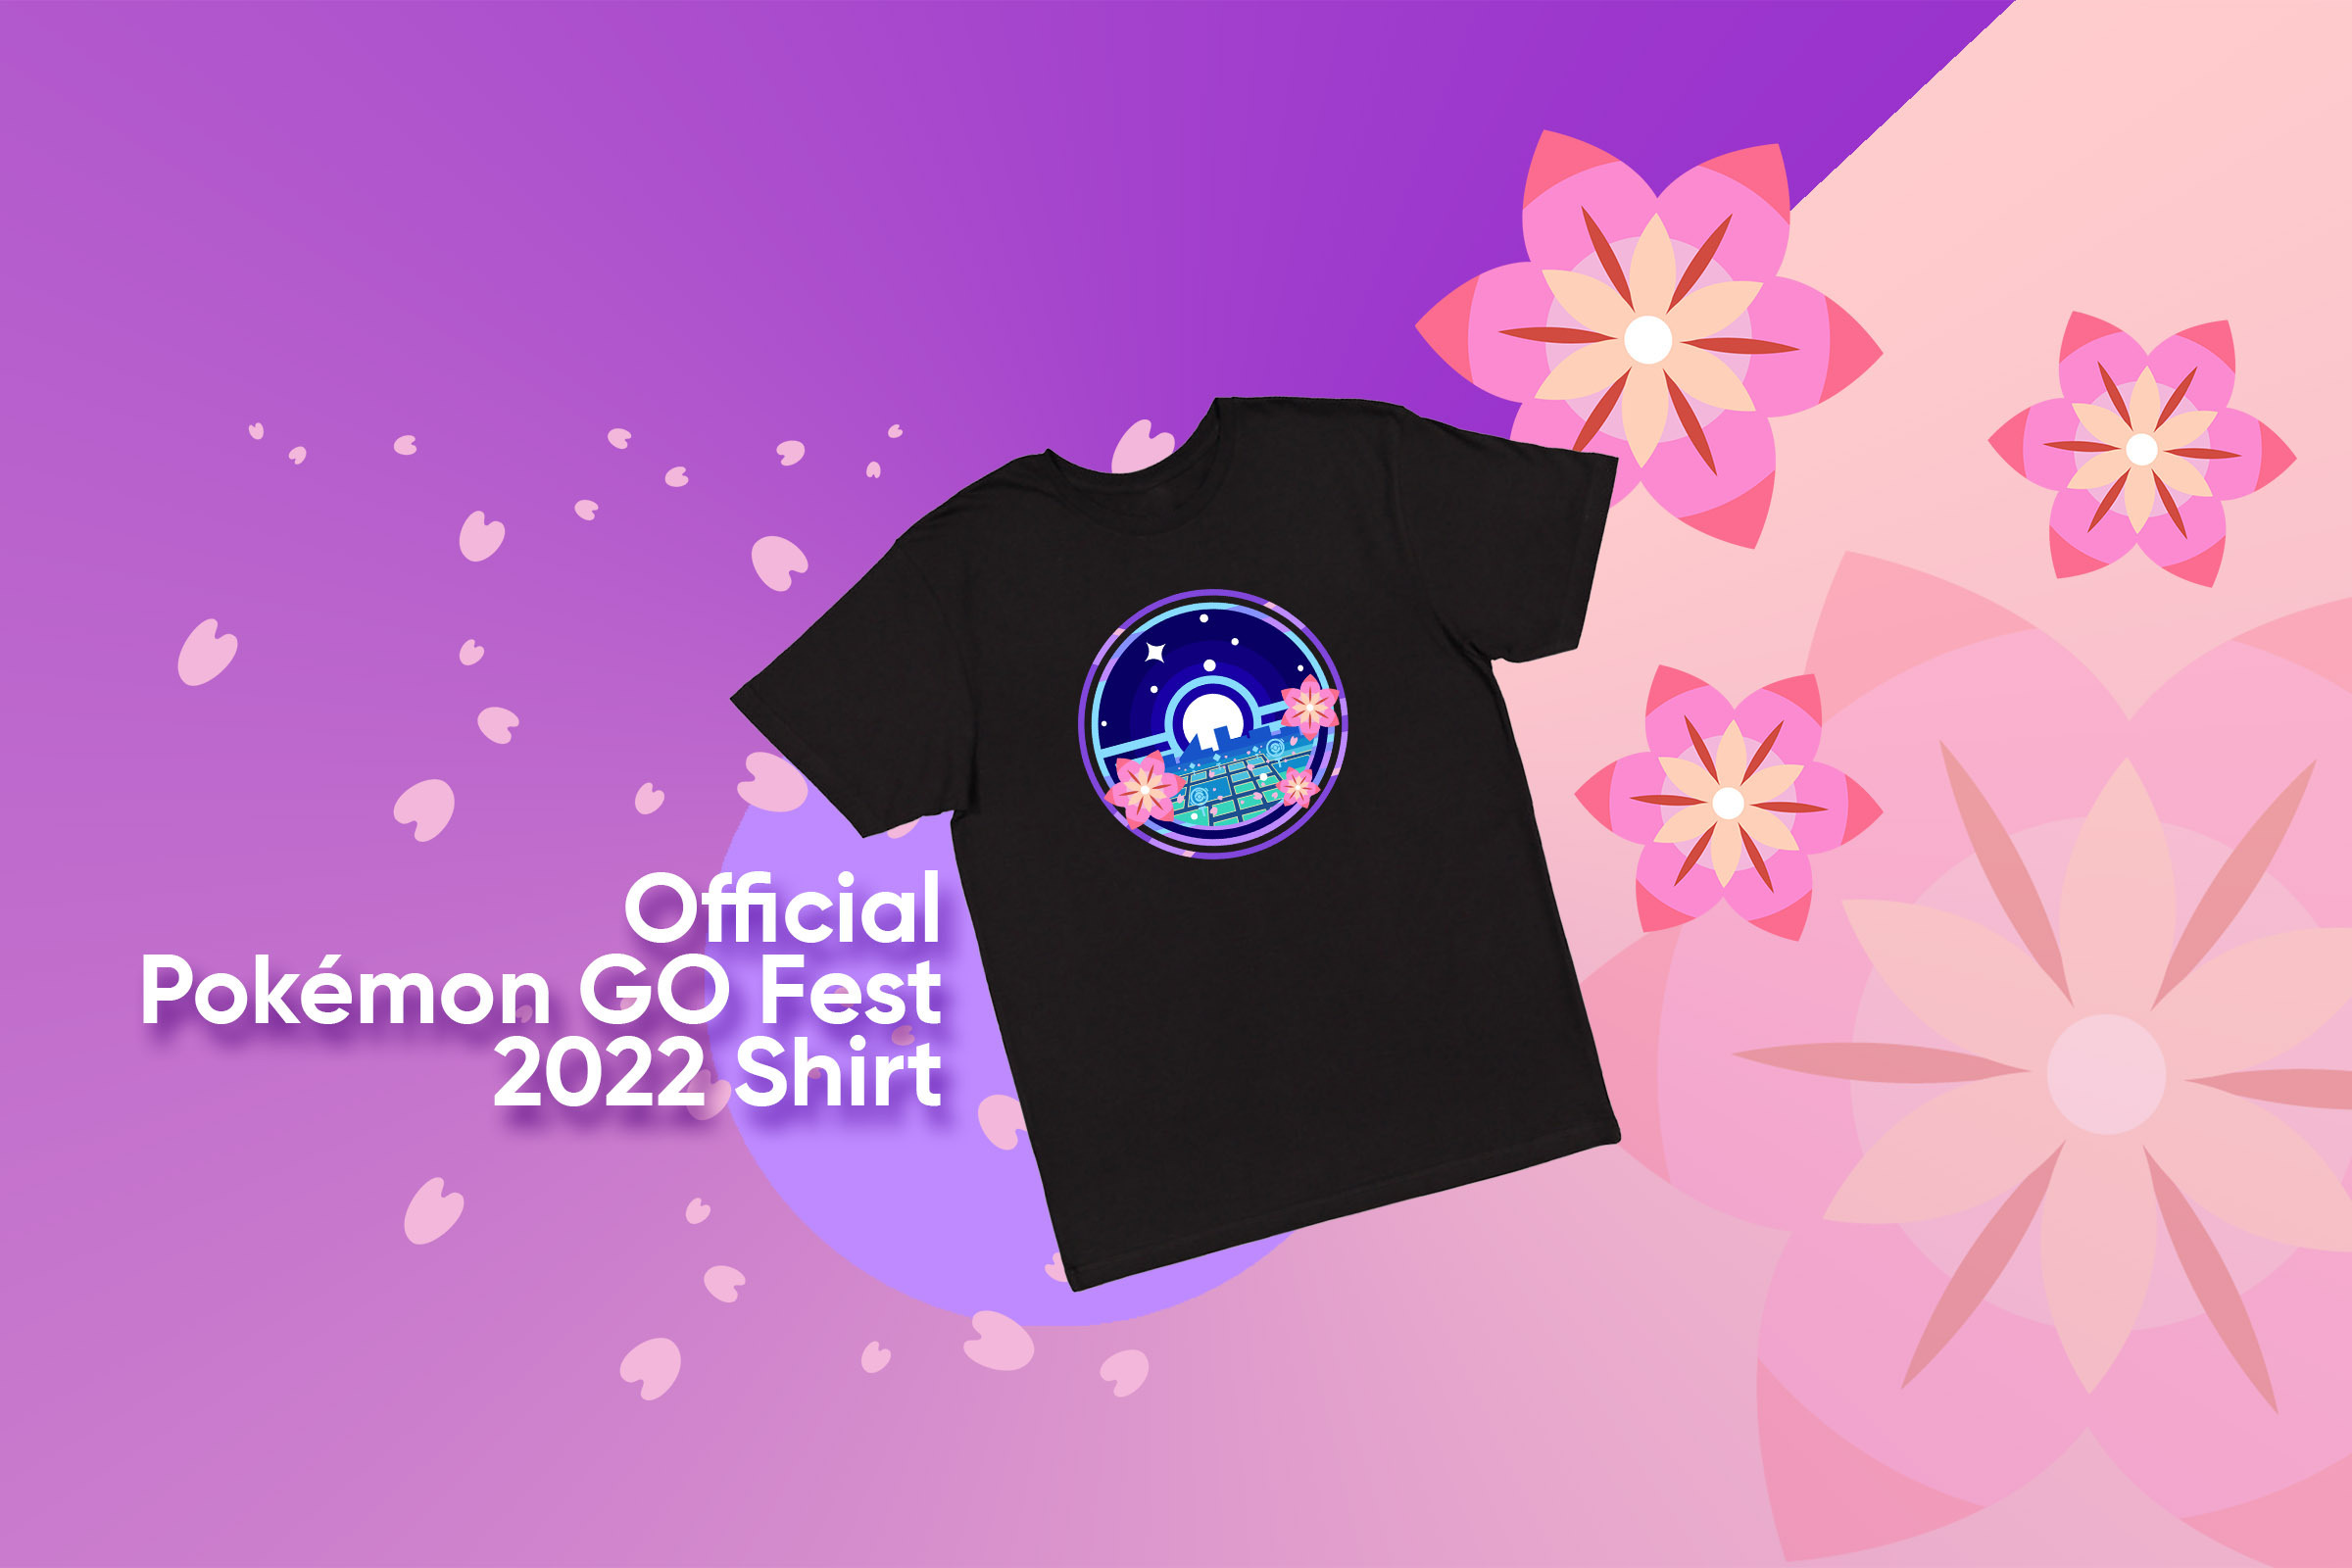 Pokémon GO Fest 2022 T-shirts will be to Trainers via Niantic Supply